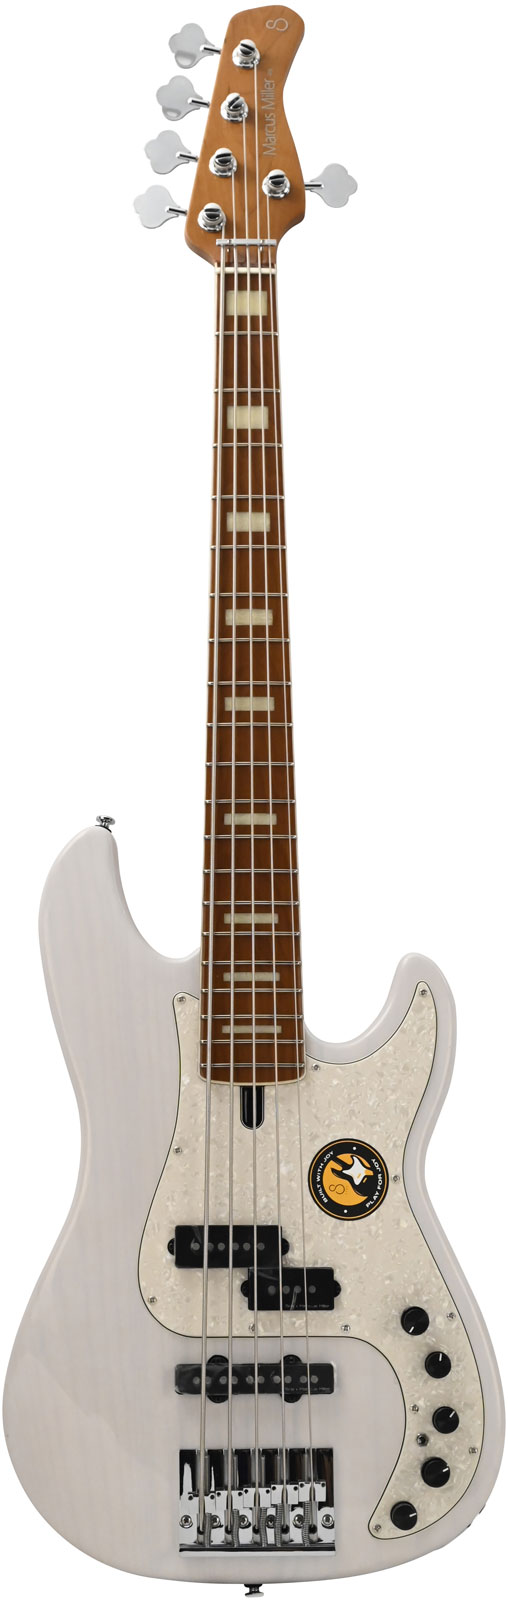 SIRE MARCUS MILLER P8 SWAMP ASH-5 WB MN + HOUSSE